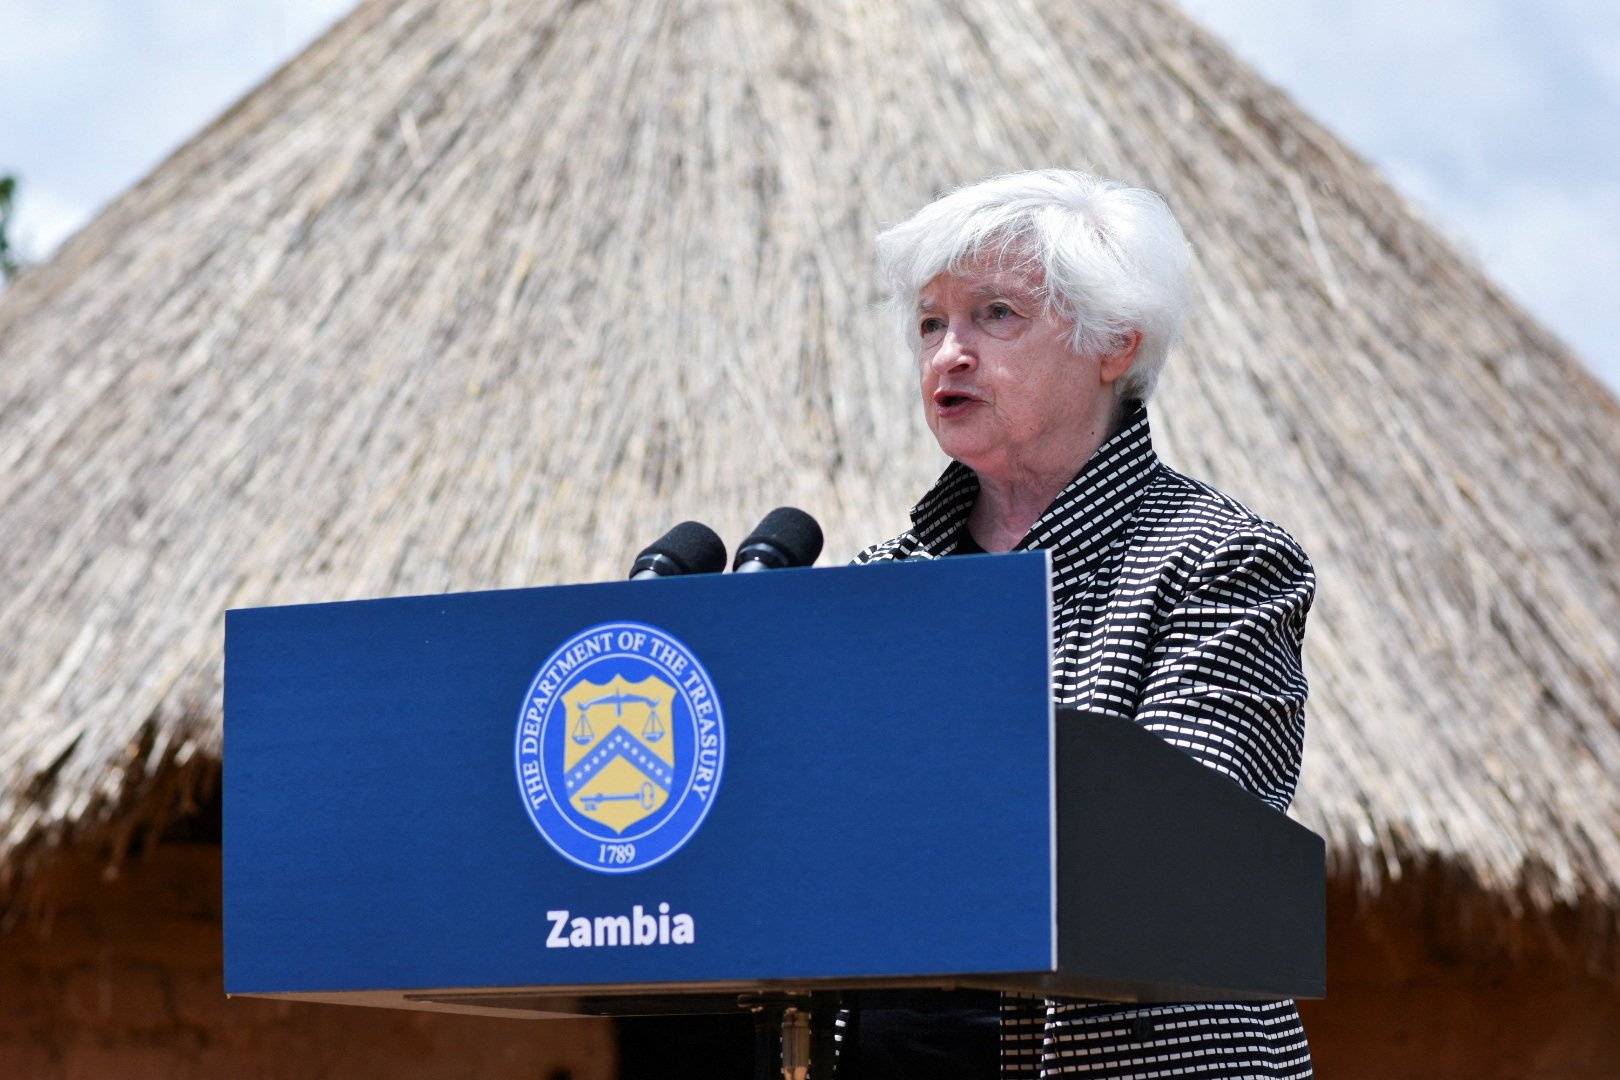 US Treasury Secretary Janet Yellen speaks during a visit to Mwalumina village in Zambia on January 24. Calls for greater debt relief and refinancing for developing countries such as Zambia have been hampered by geopolitical tensions and a lack of transparency. Photo: Reuters